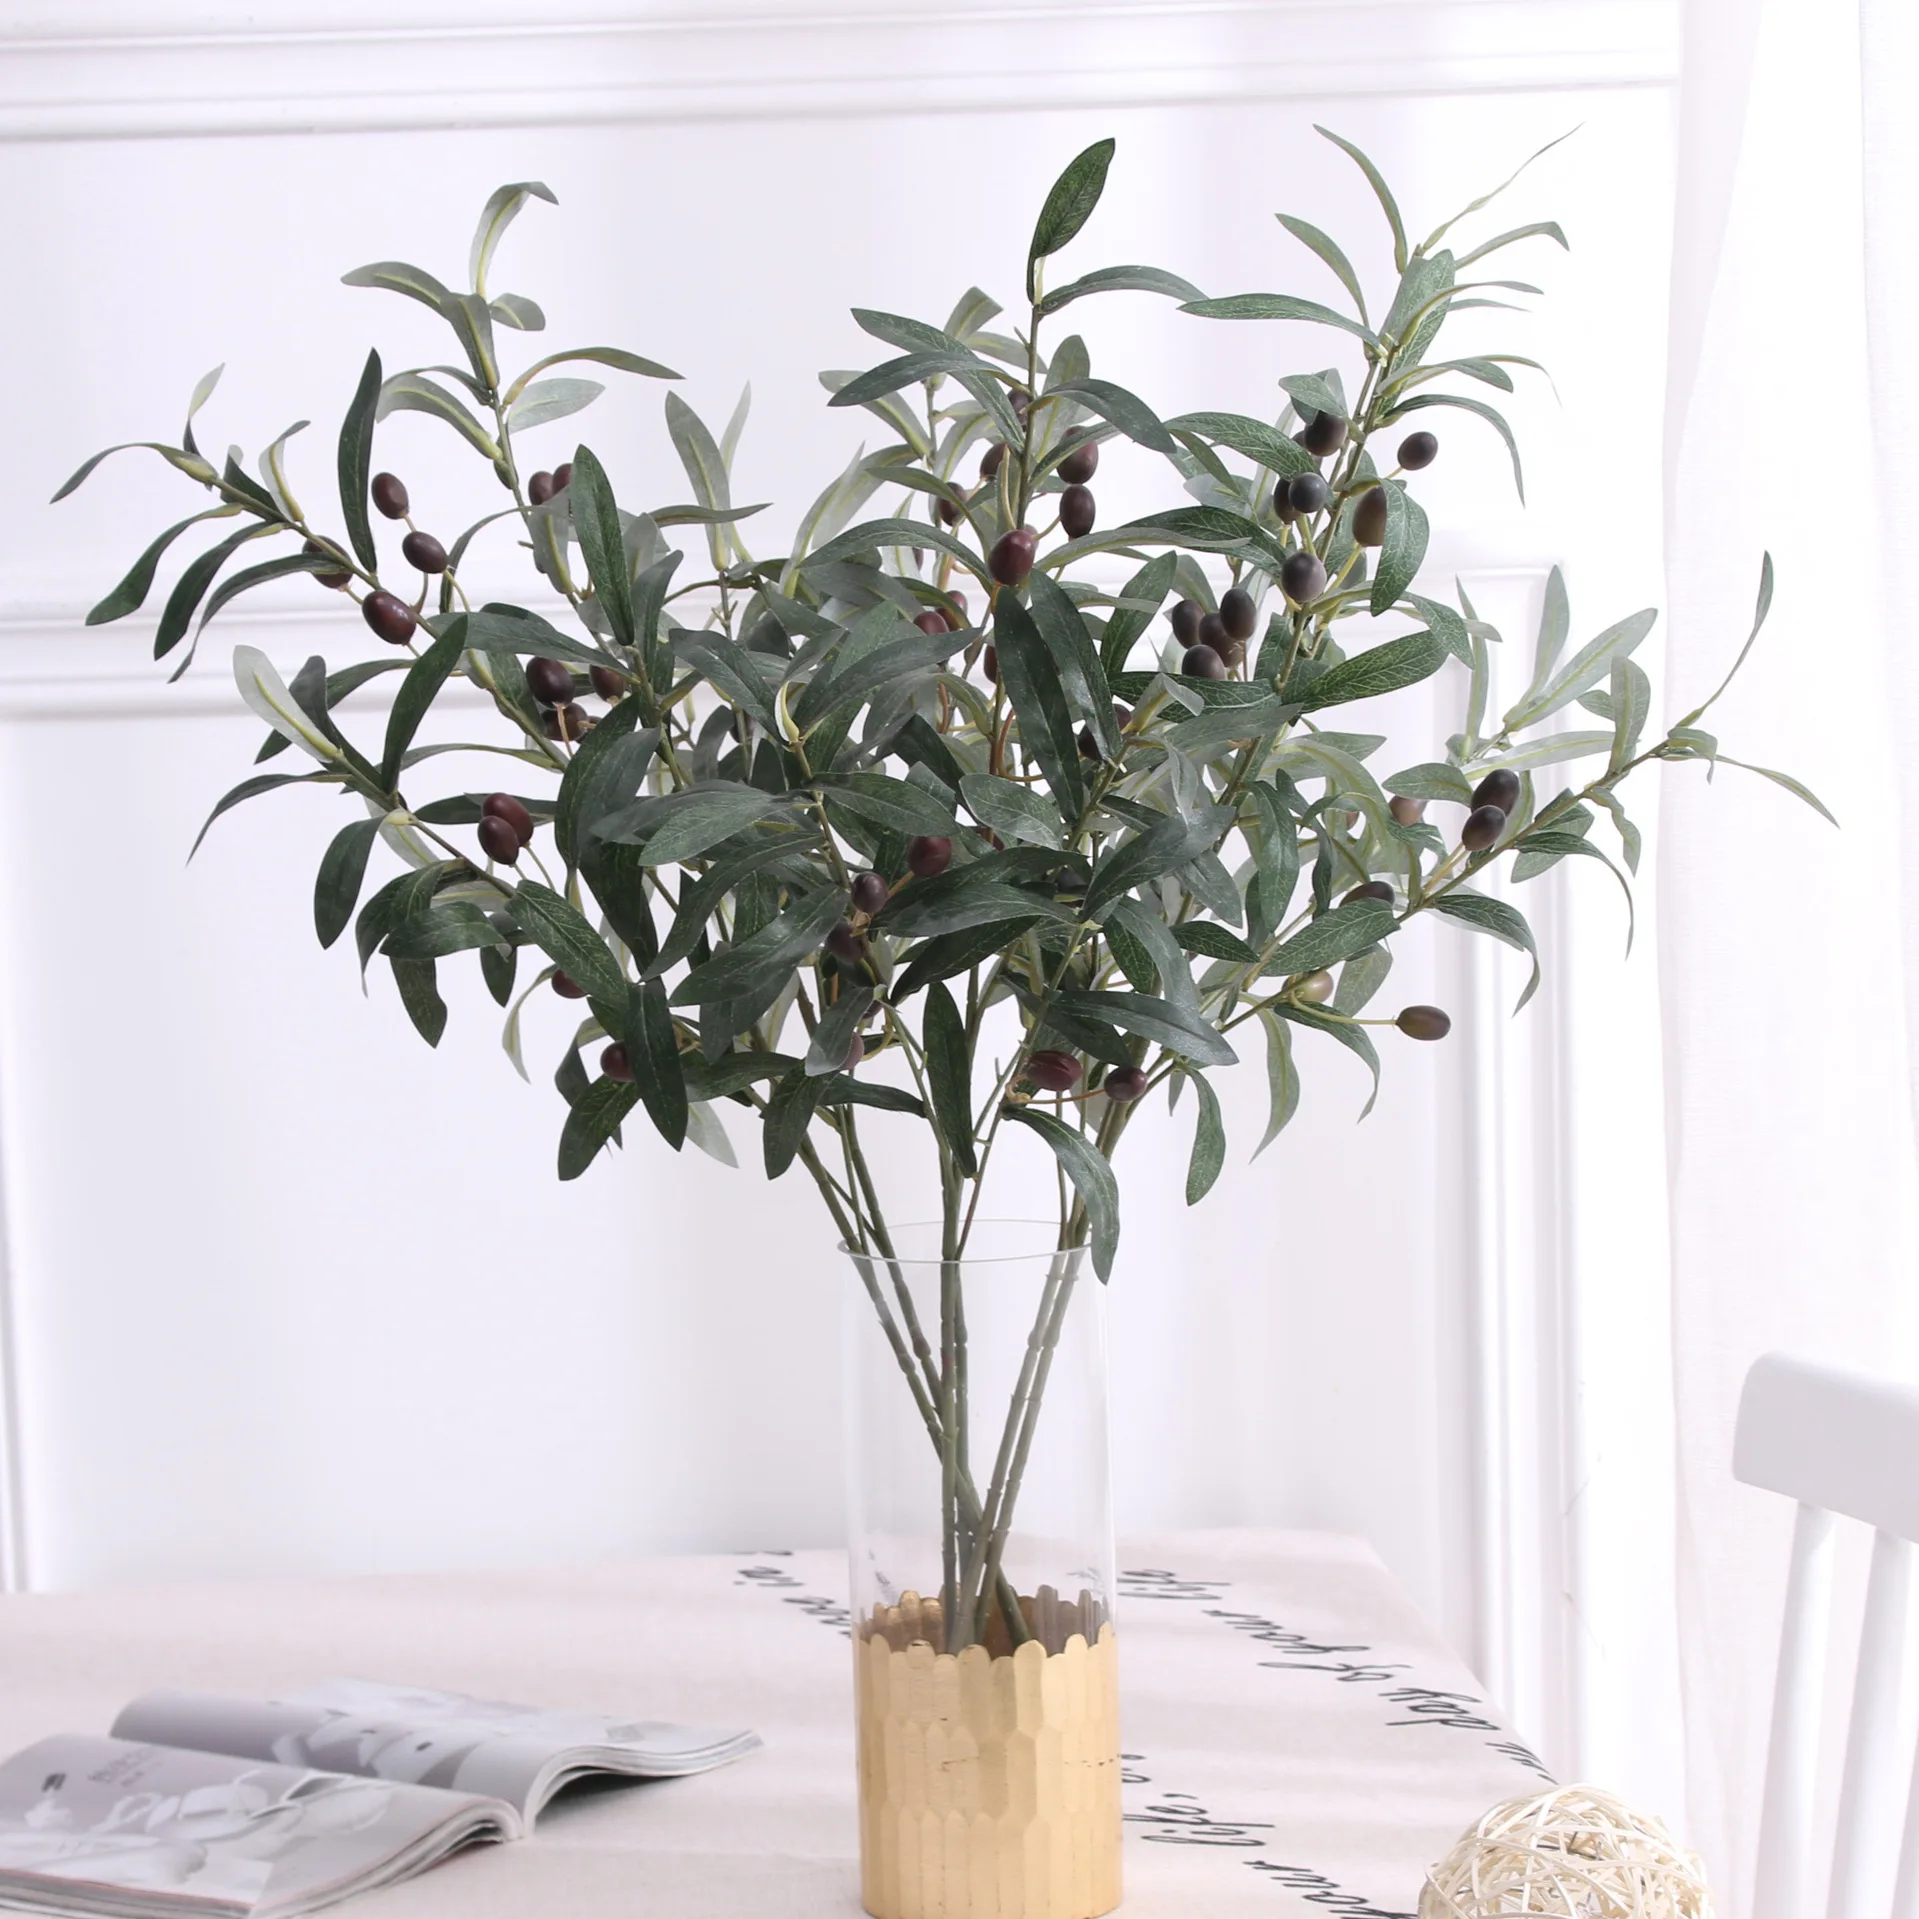 

Home Office Decor Faux Plastic Fruits Branch Plants Artificial Plants Greenery Olive Branches Stems, Colorful